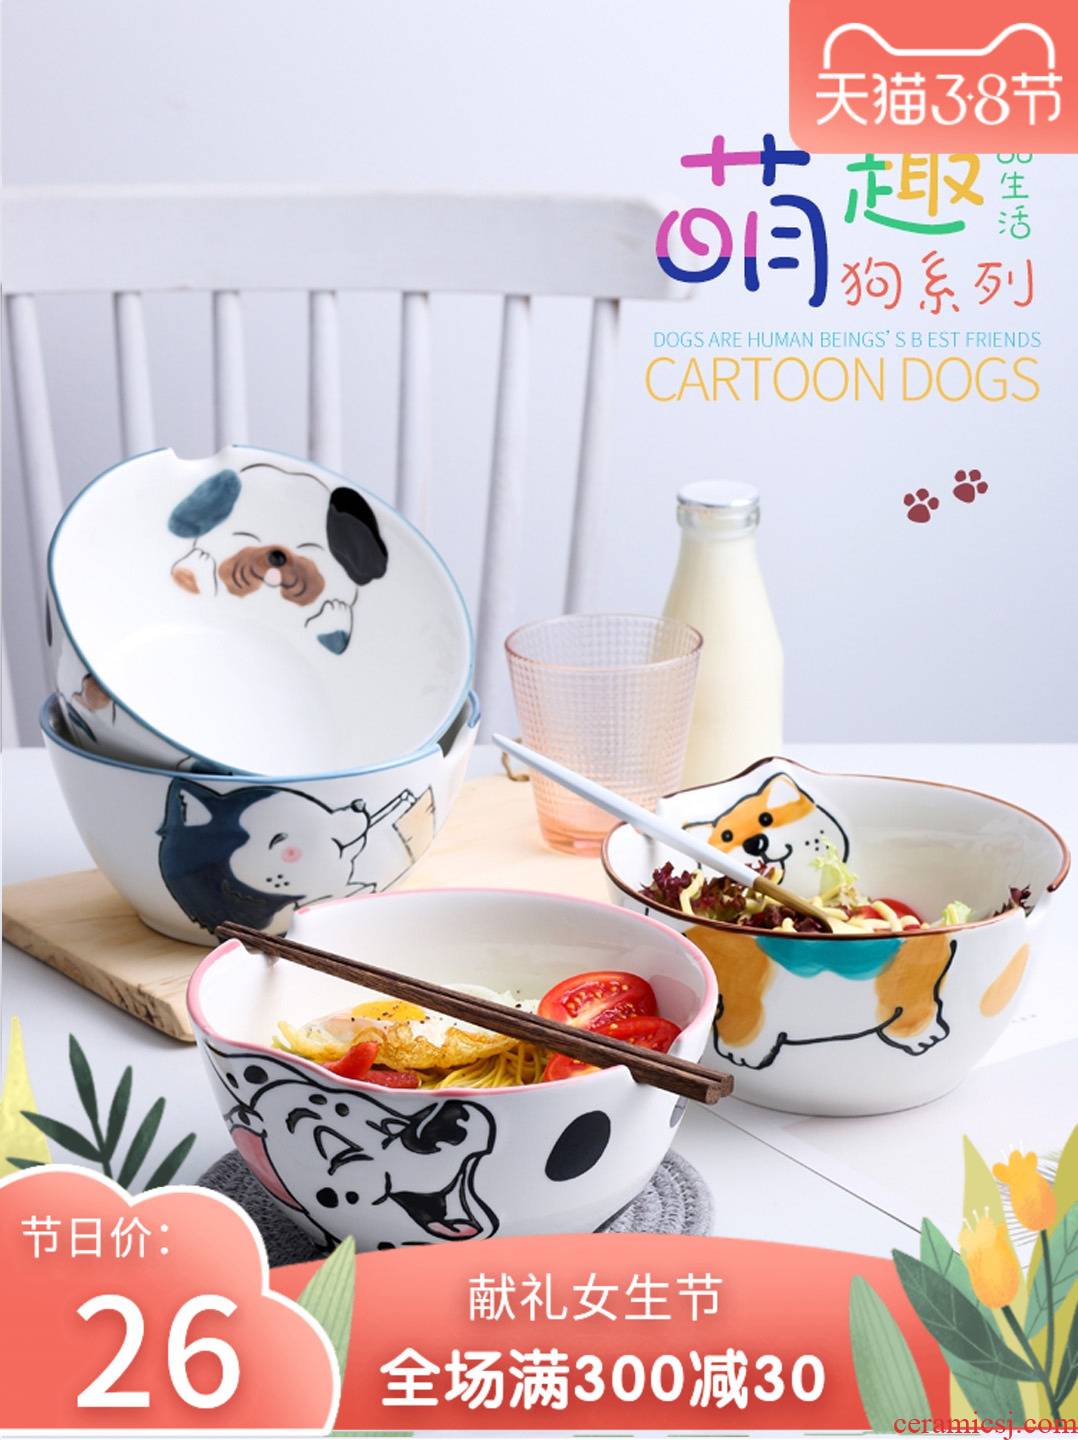 Large ceramic cartoon mercifully rainbow such as bowl to creative animal motifs rainbow such to use web celebrity trill microwave oven available jobs